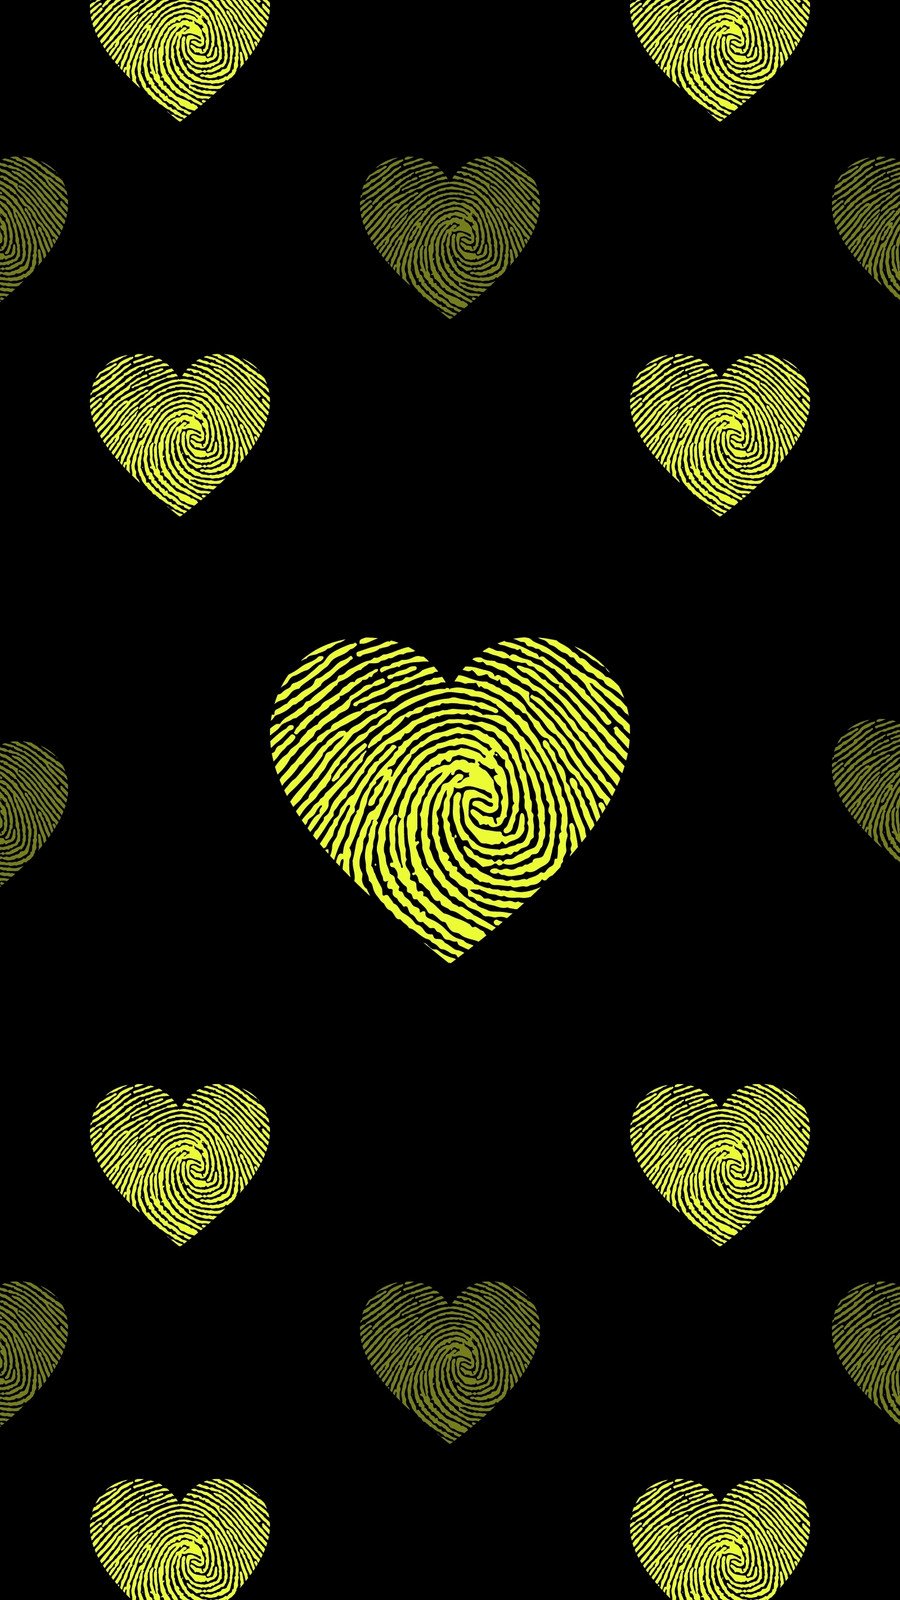 Neon hearts live wallpaper:Amazon.com:Appstore for Android